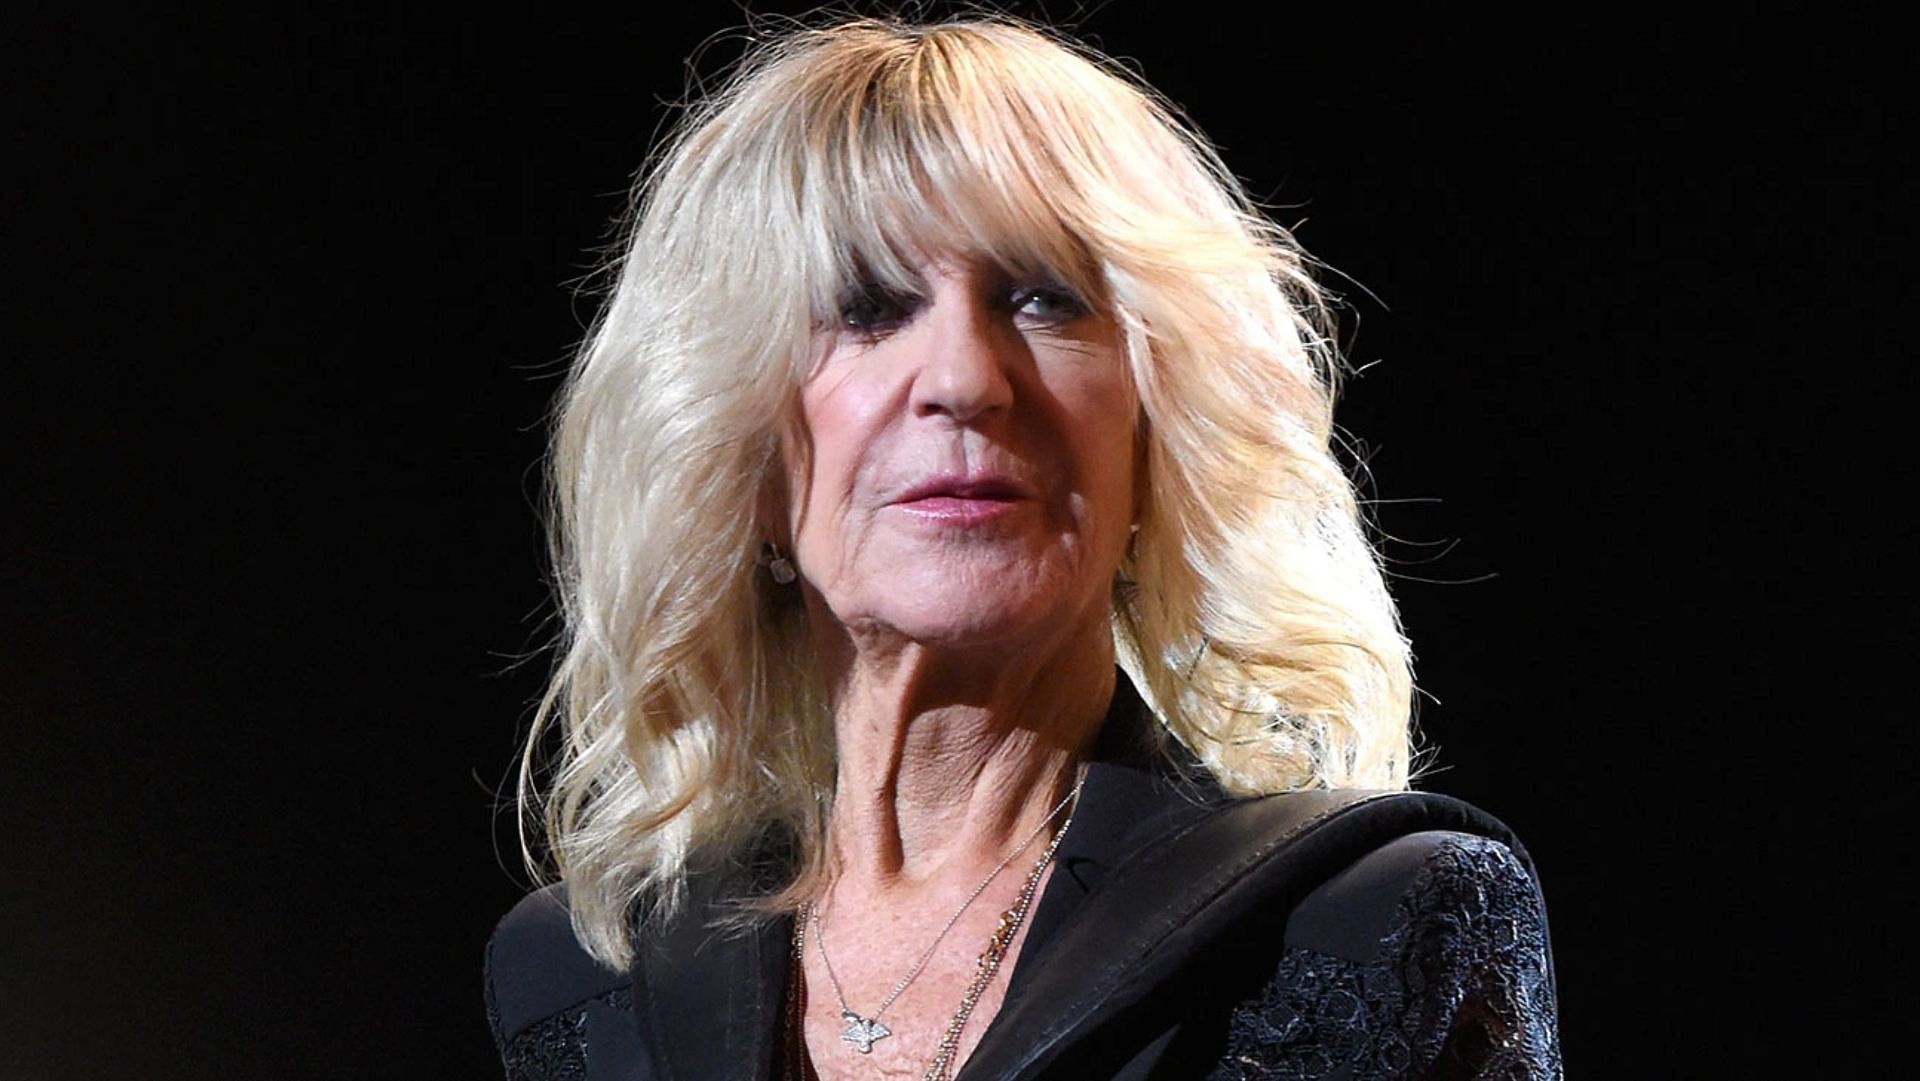 Christine McVie had a fear of flying and agoraphobia. (Image via Kevin Mazur/Getty)